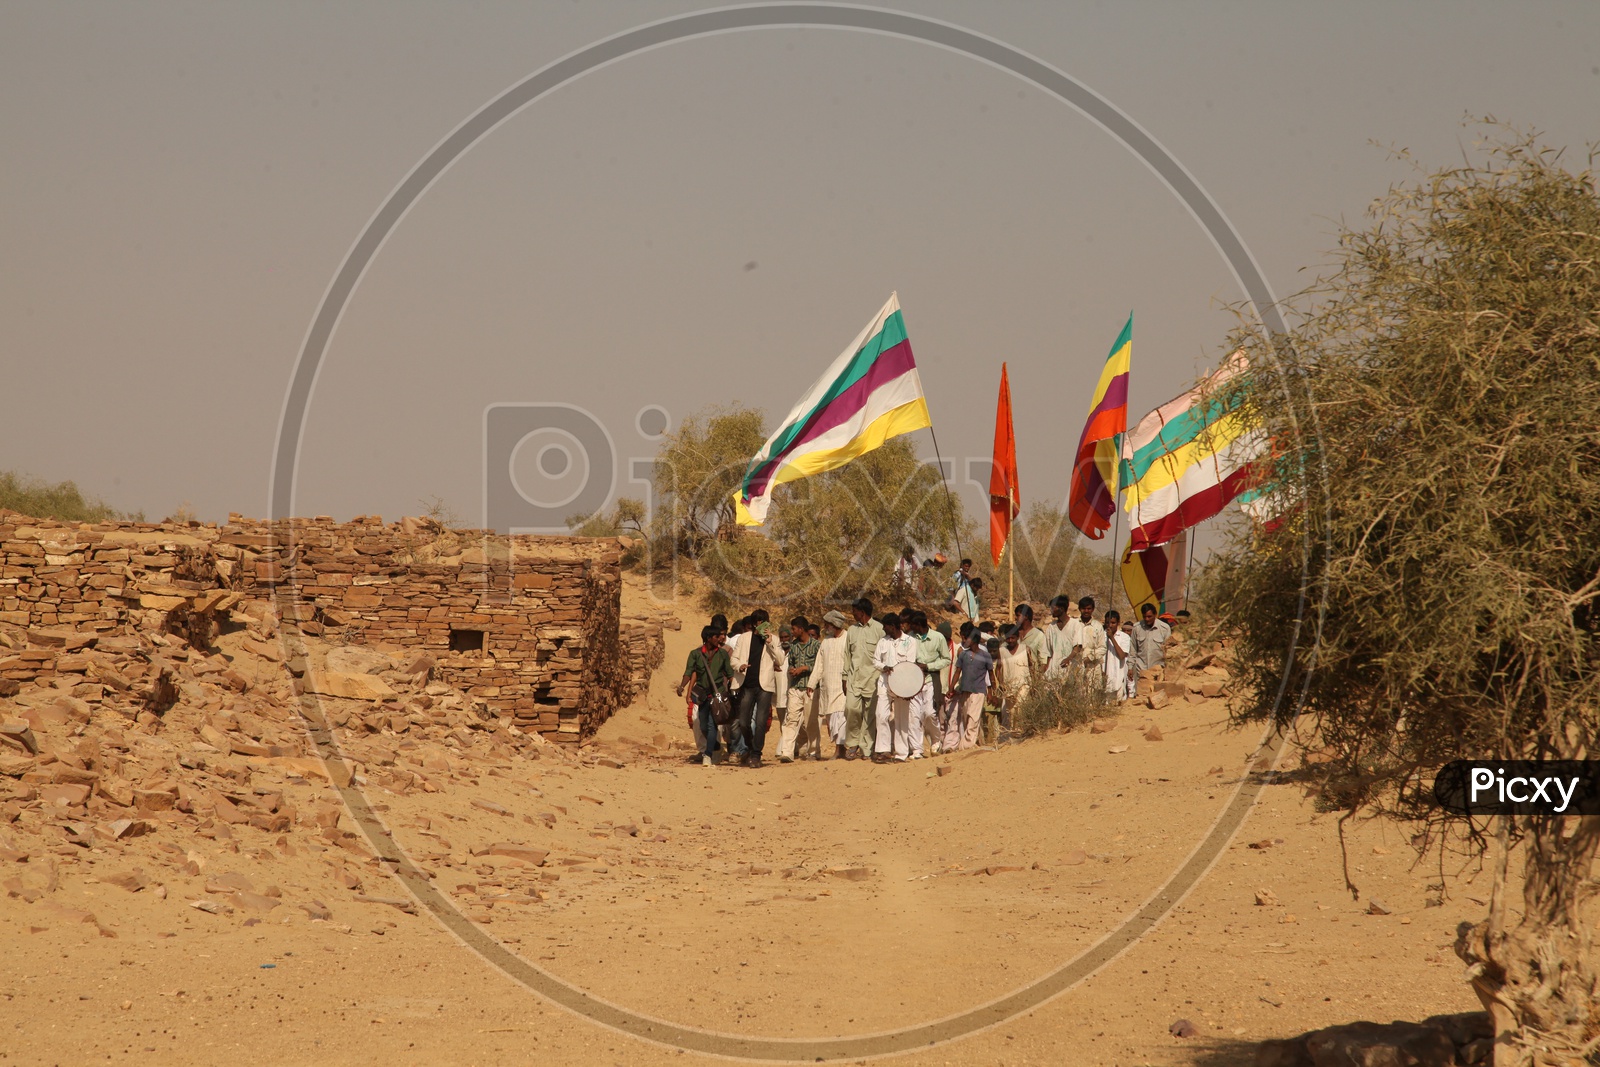 Agitation by men in the desert with flags